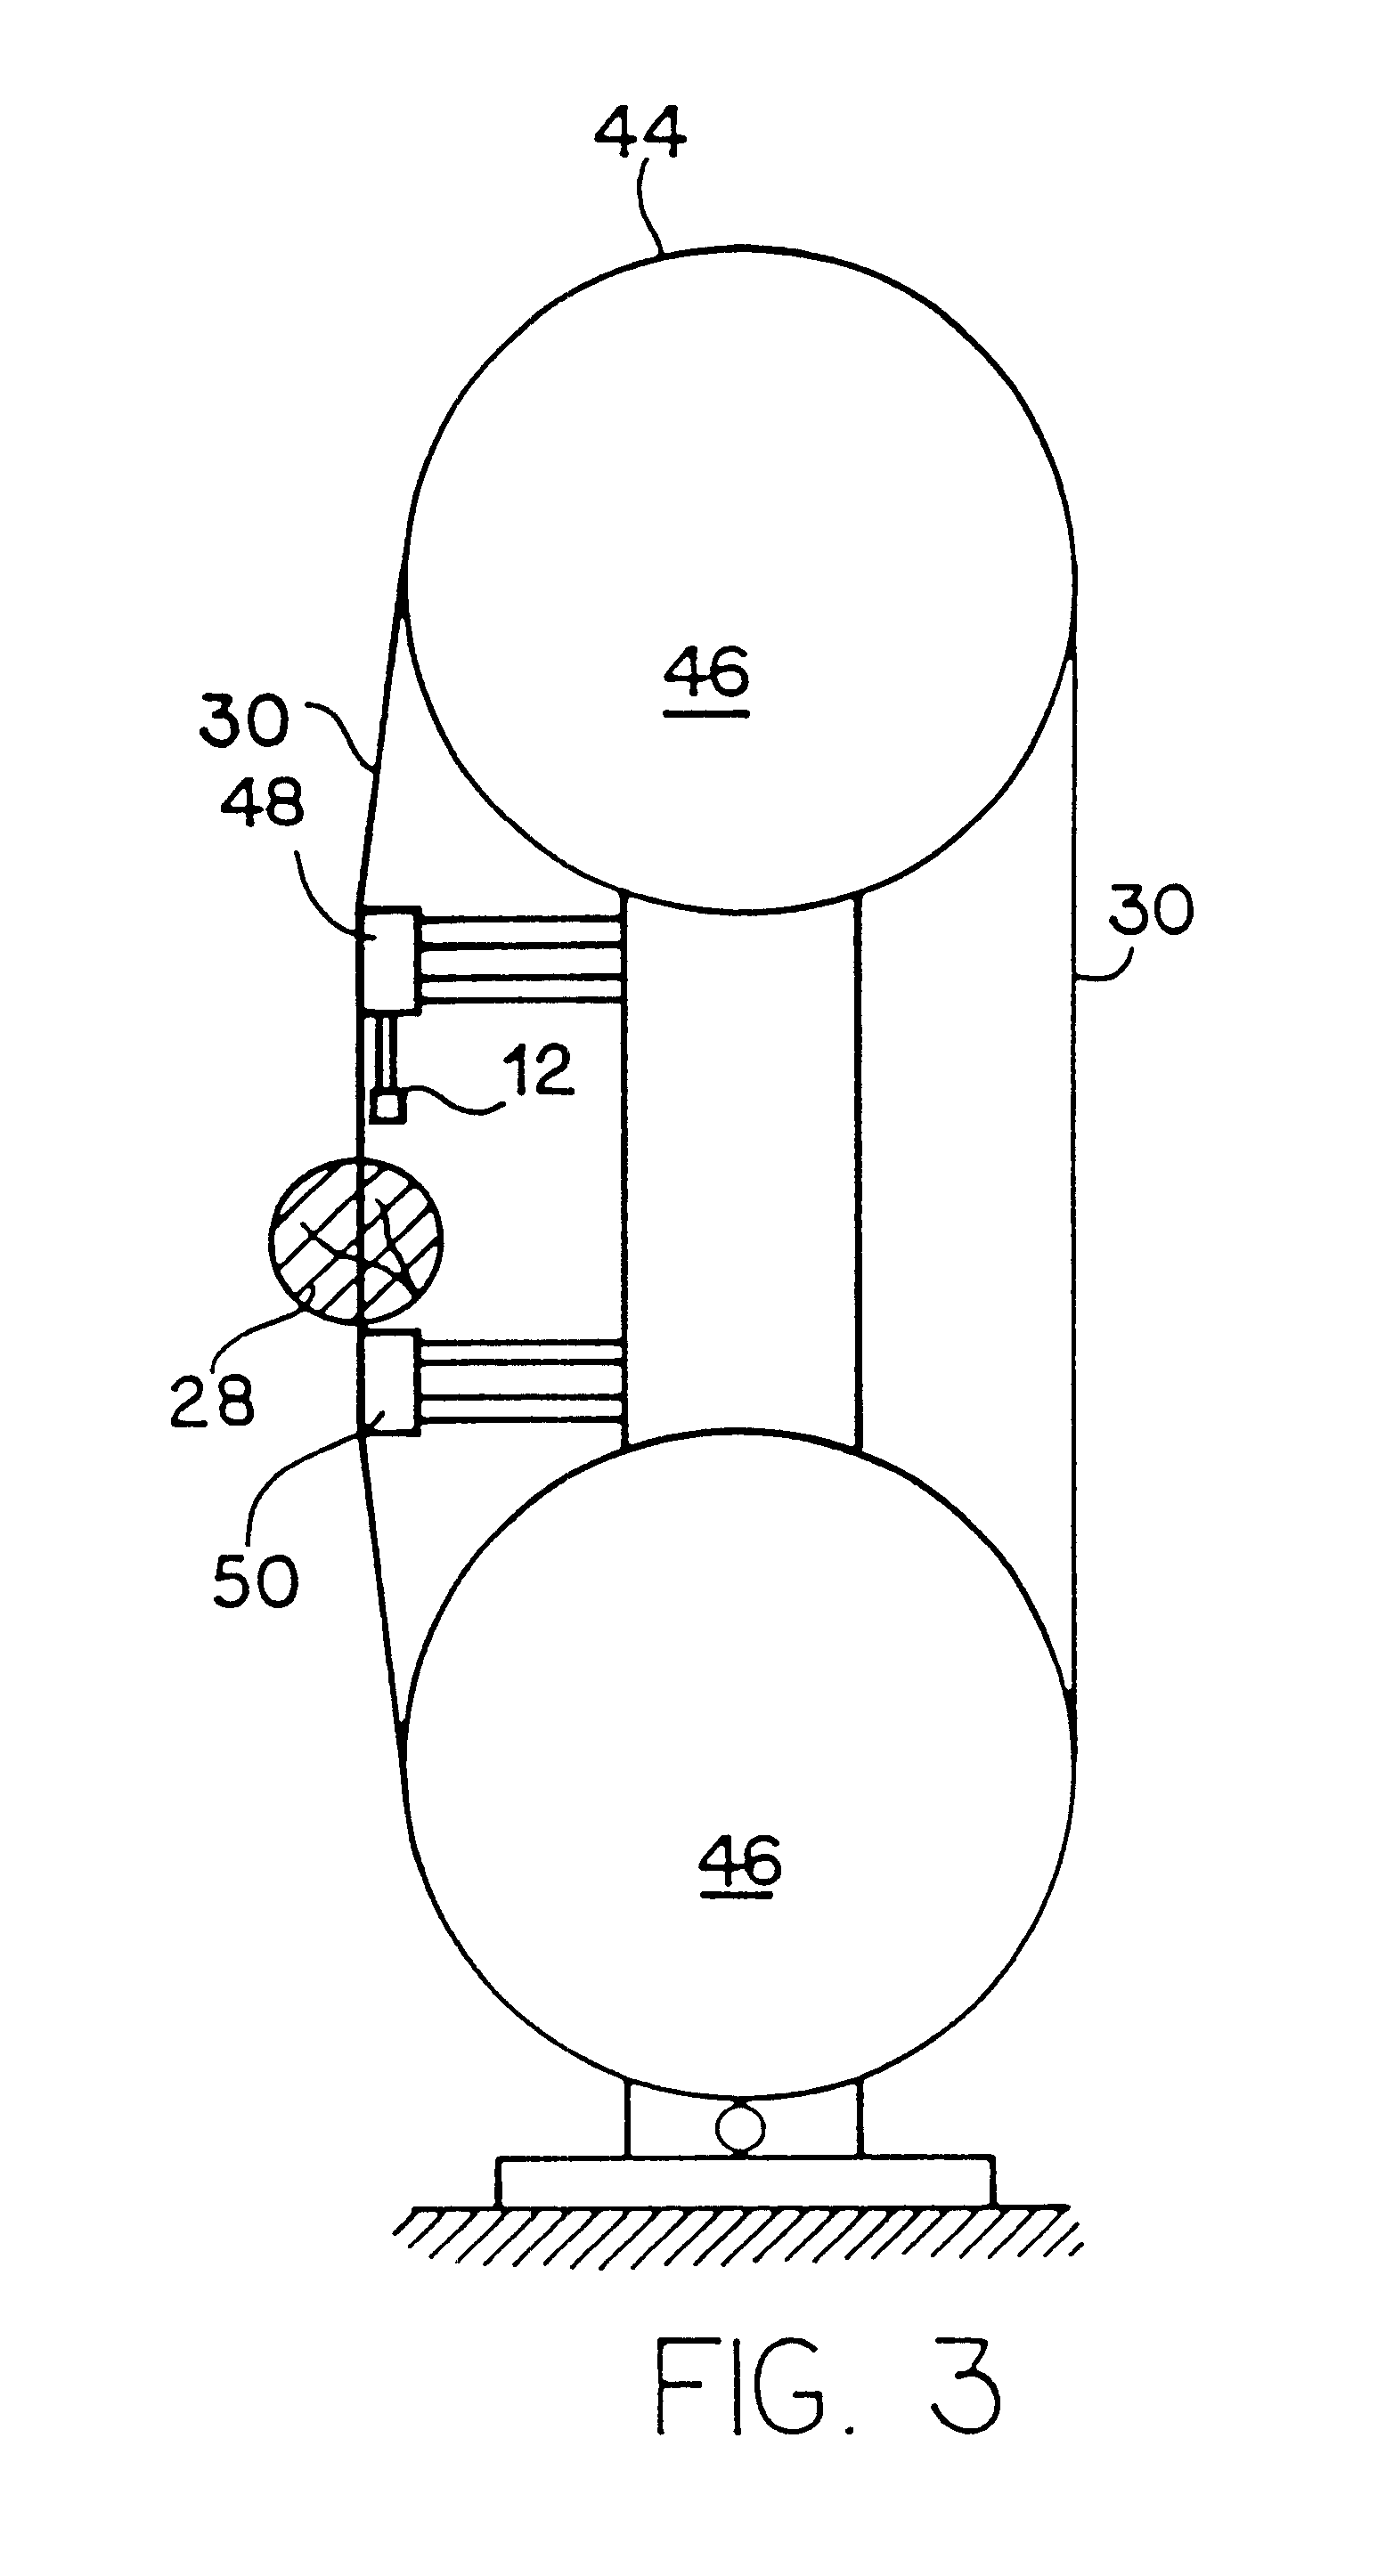 Apparatus for controlling work feed rate for cutting wood, metal and other materials